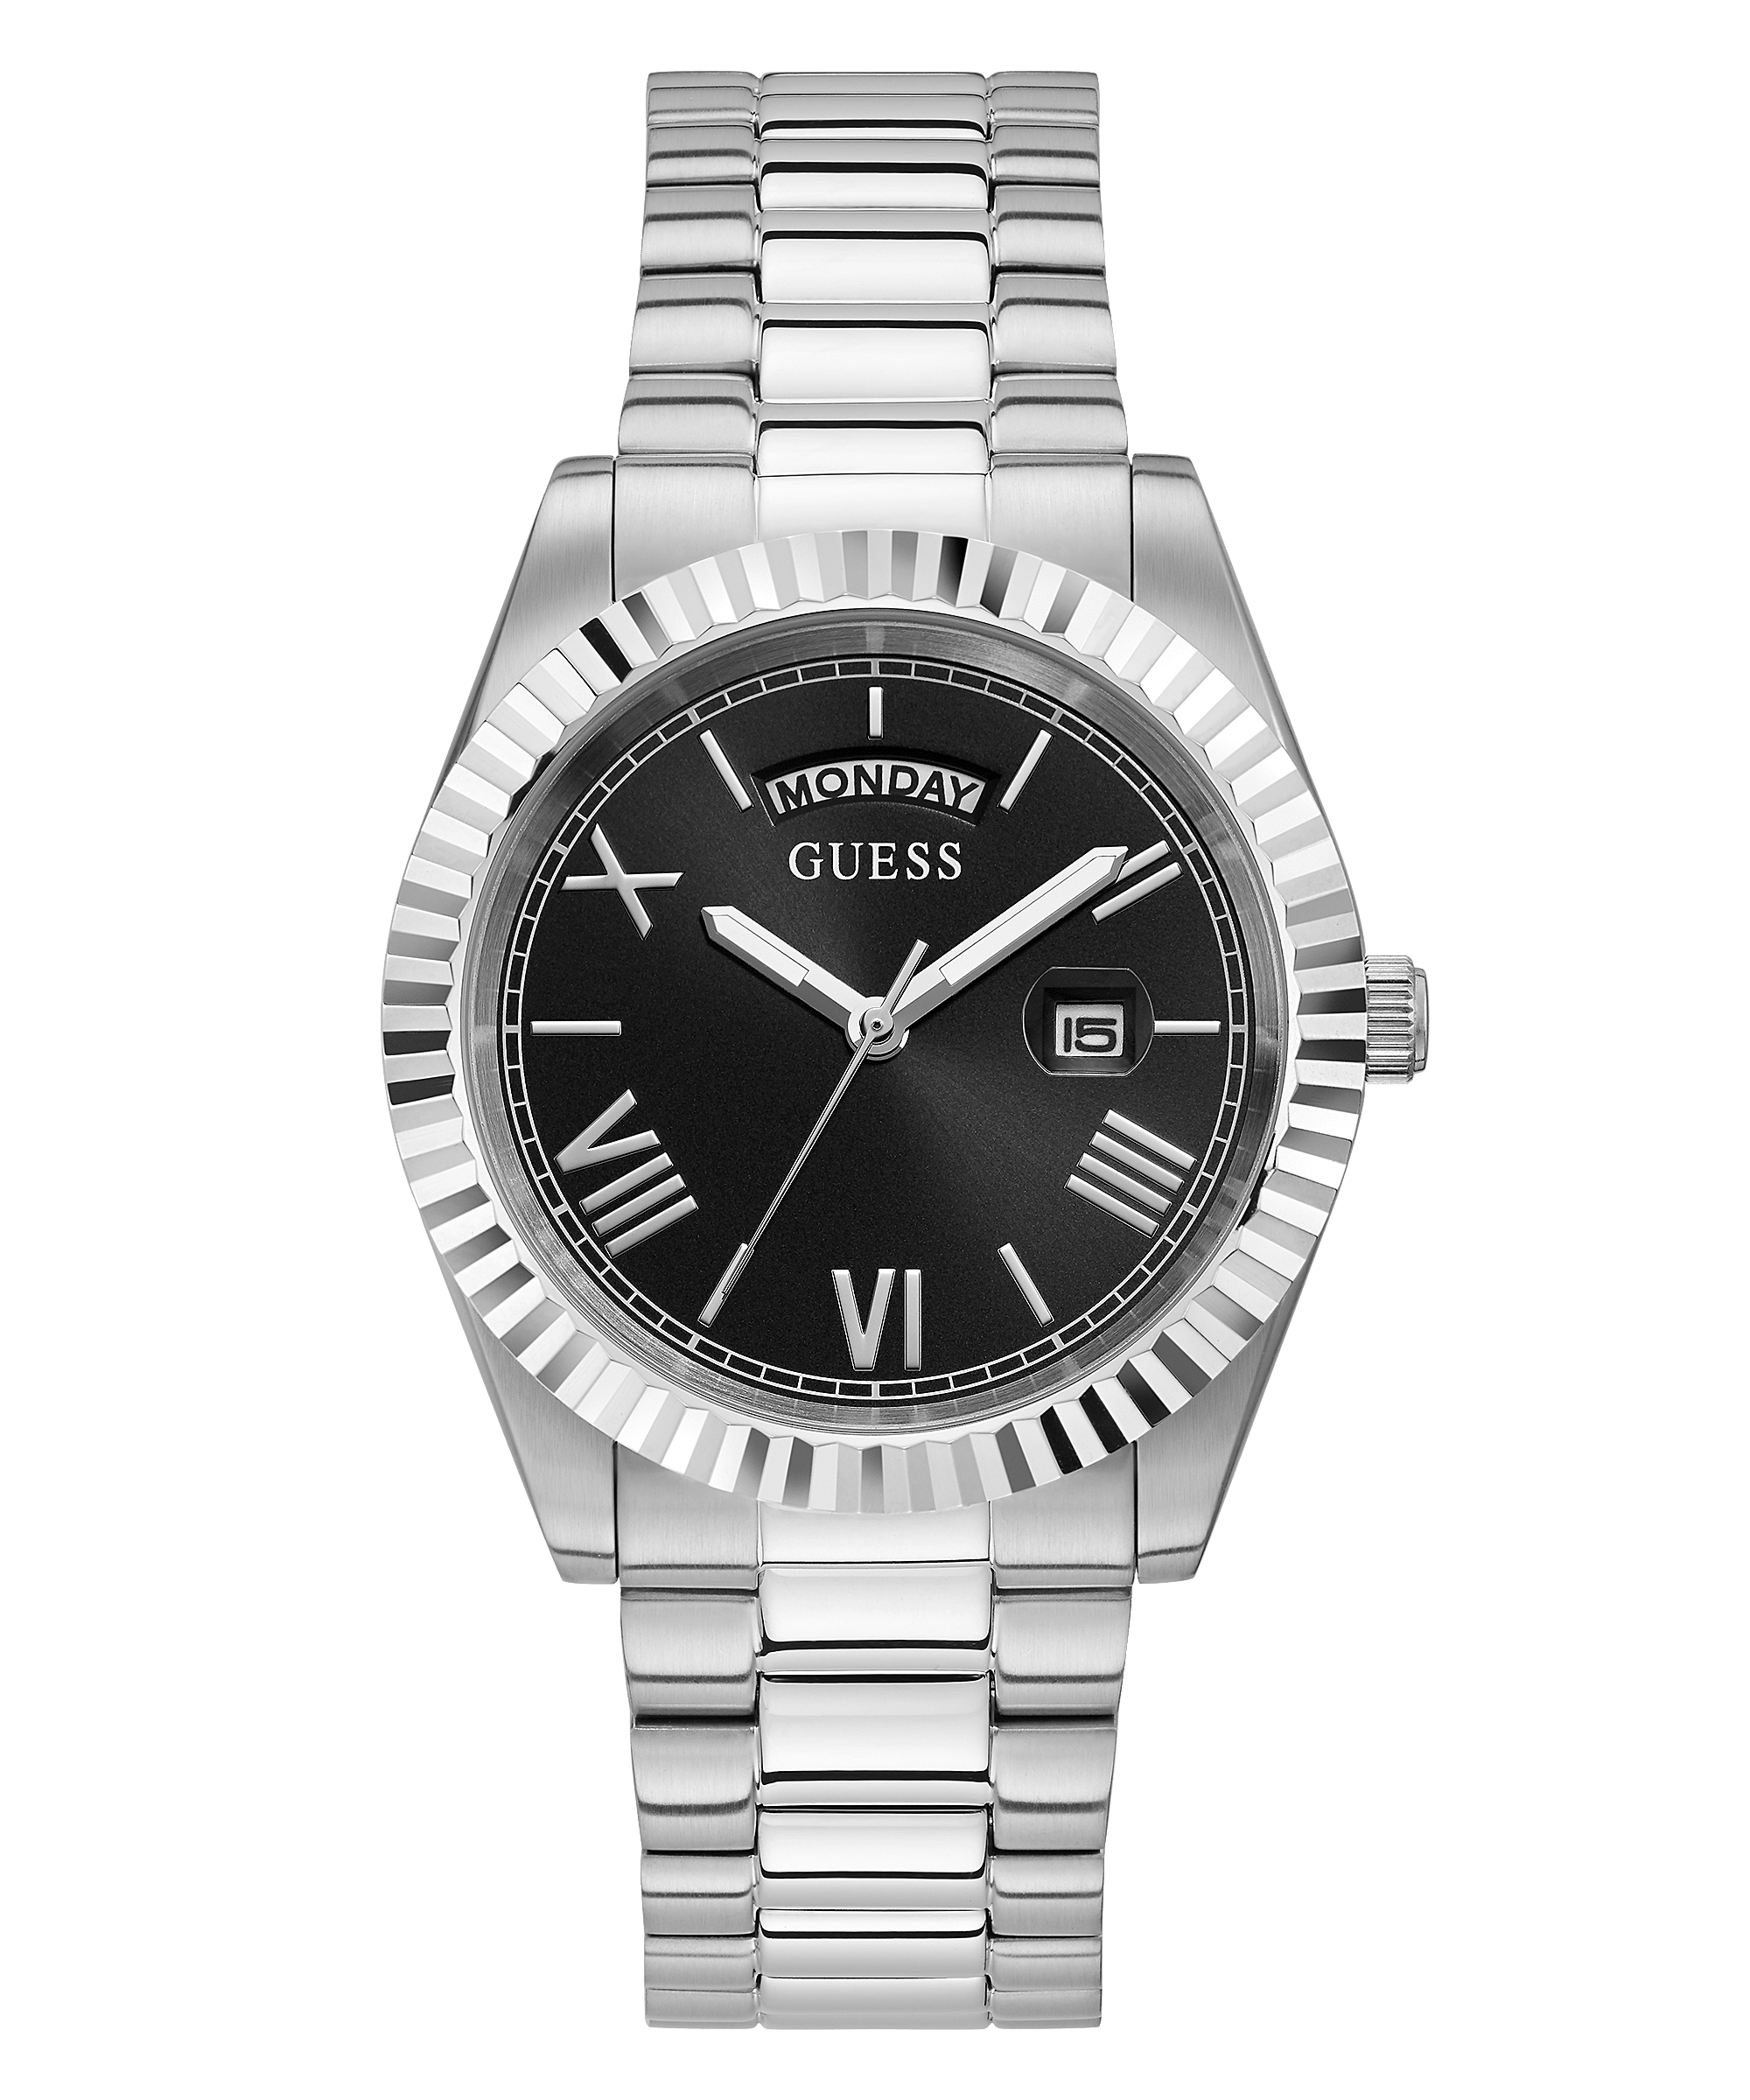 Guess Connoisseur Day/Date Watch